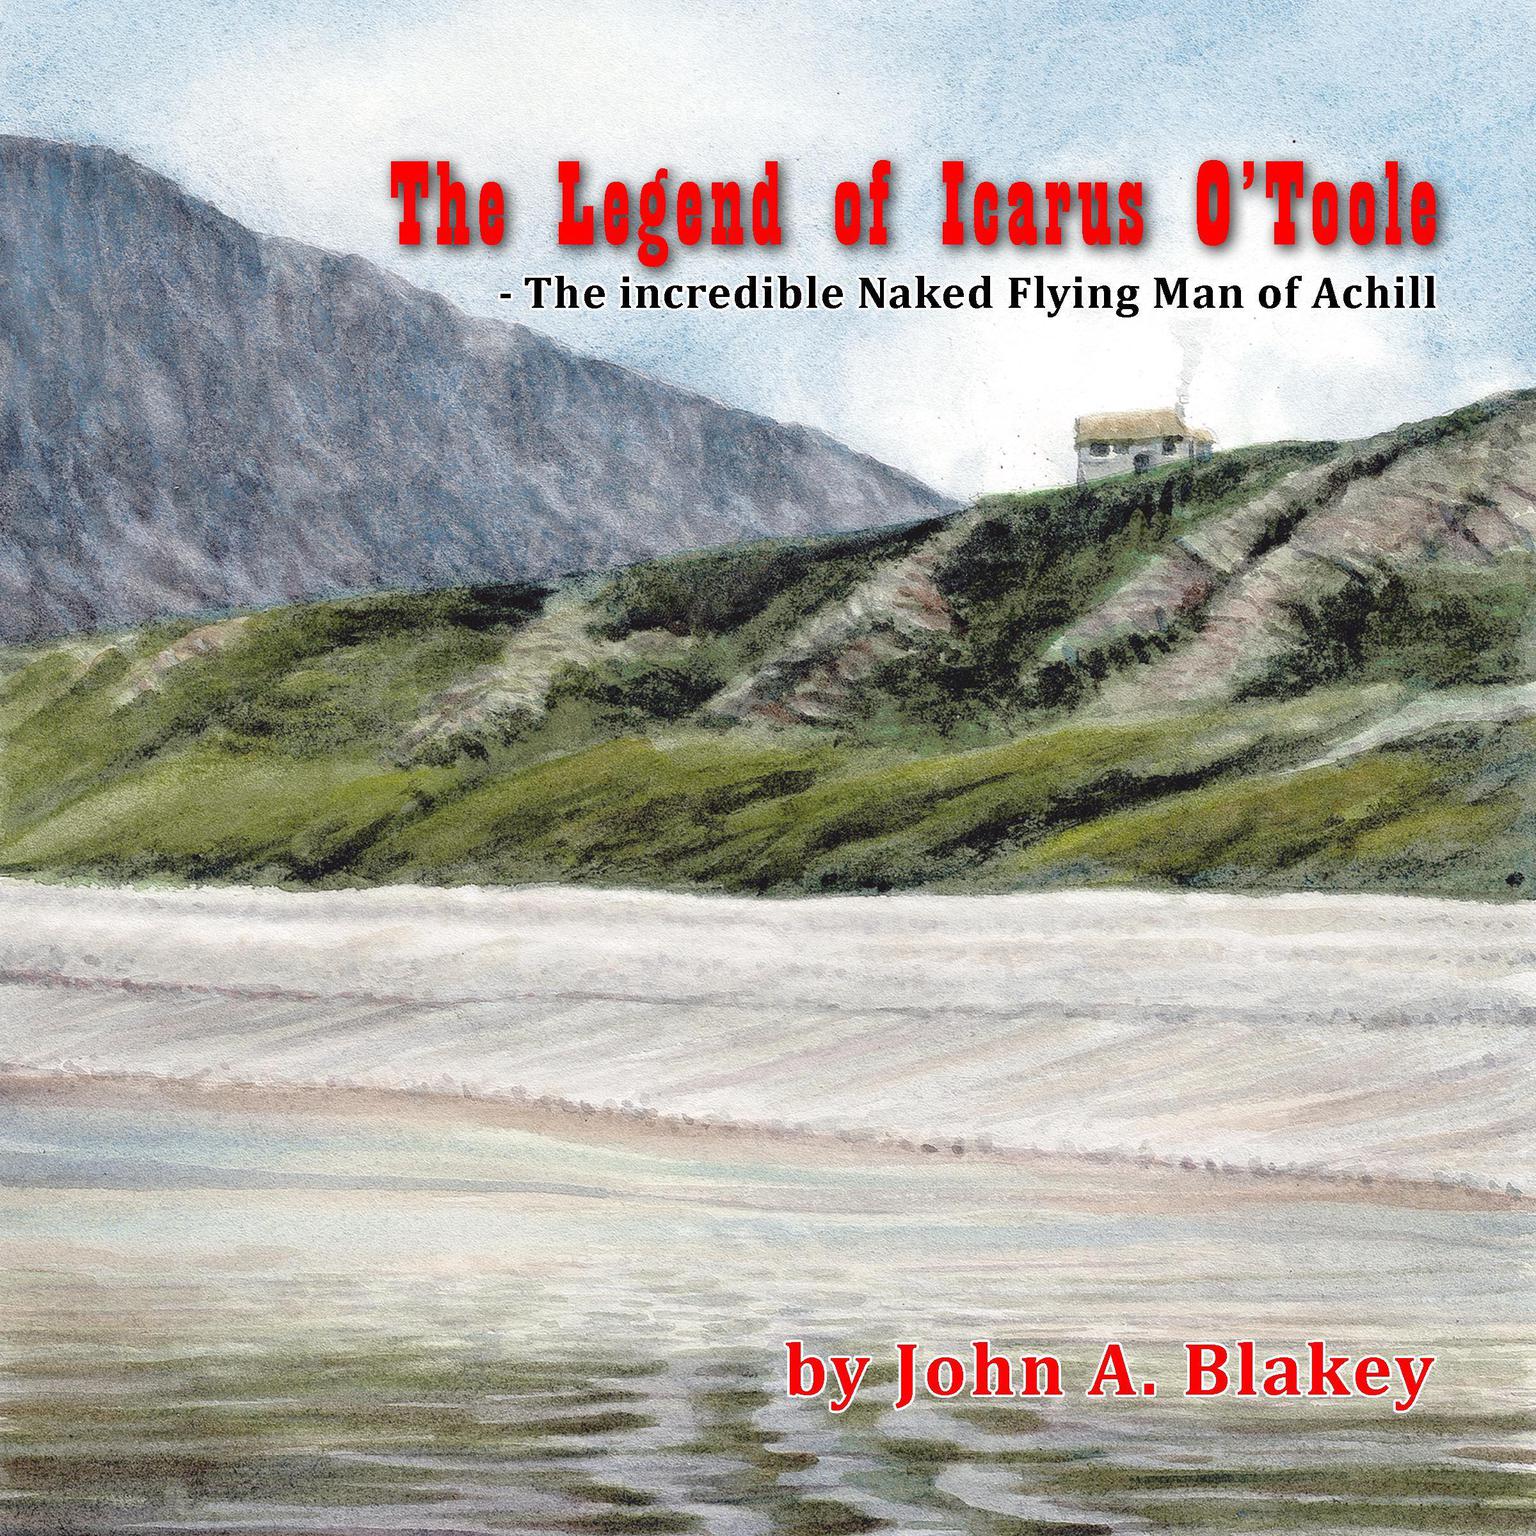 The Legend of Icarus OToole, The Incredible Naked Flying Man of Achill Audiobook, by John Blakey